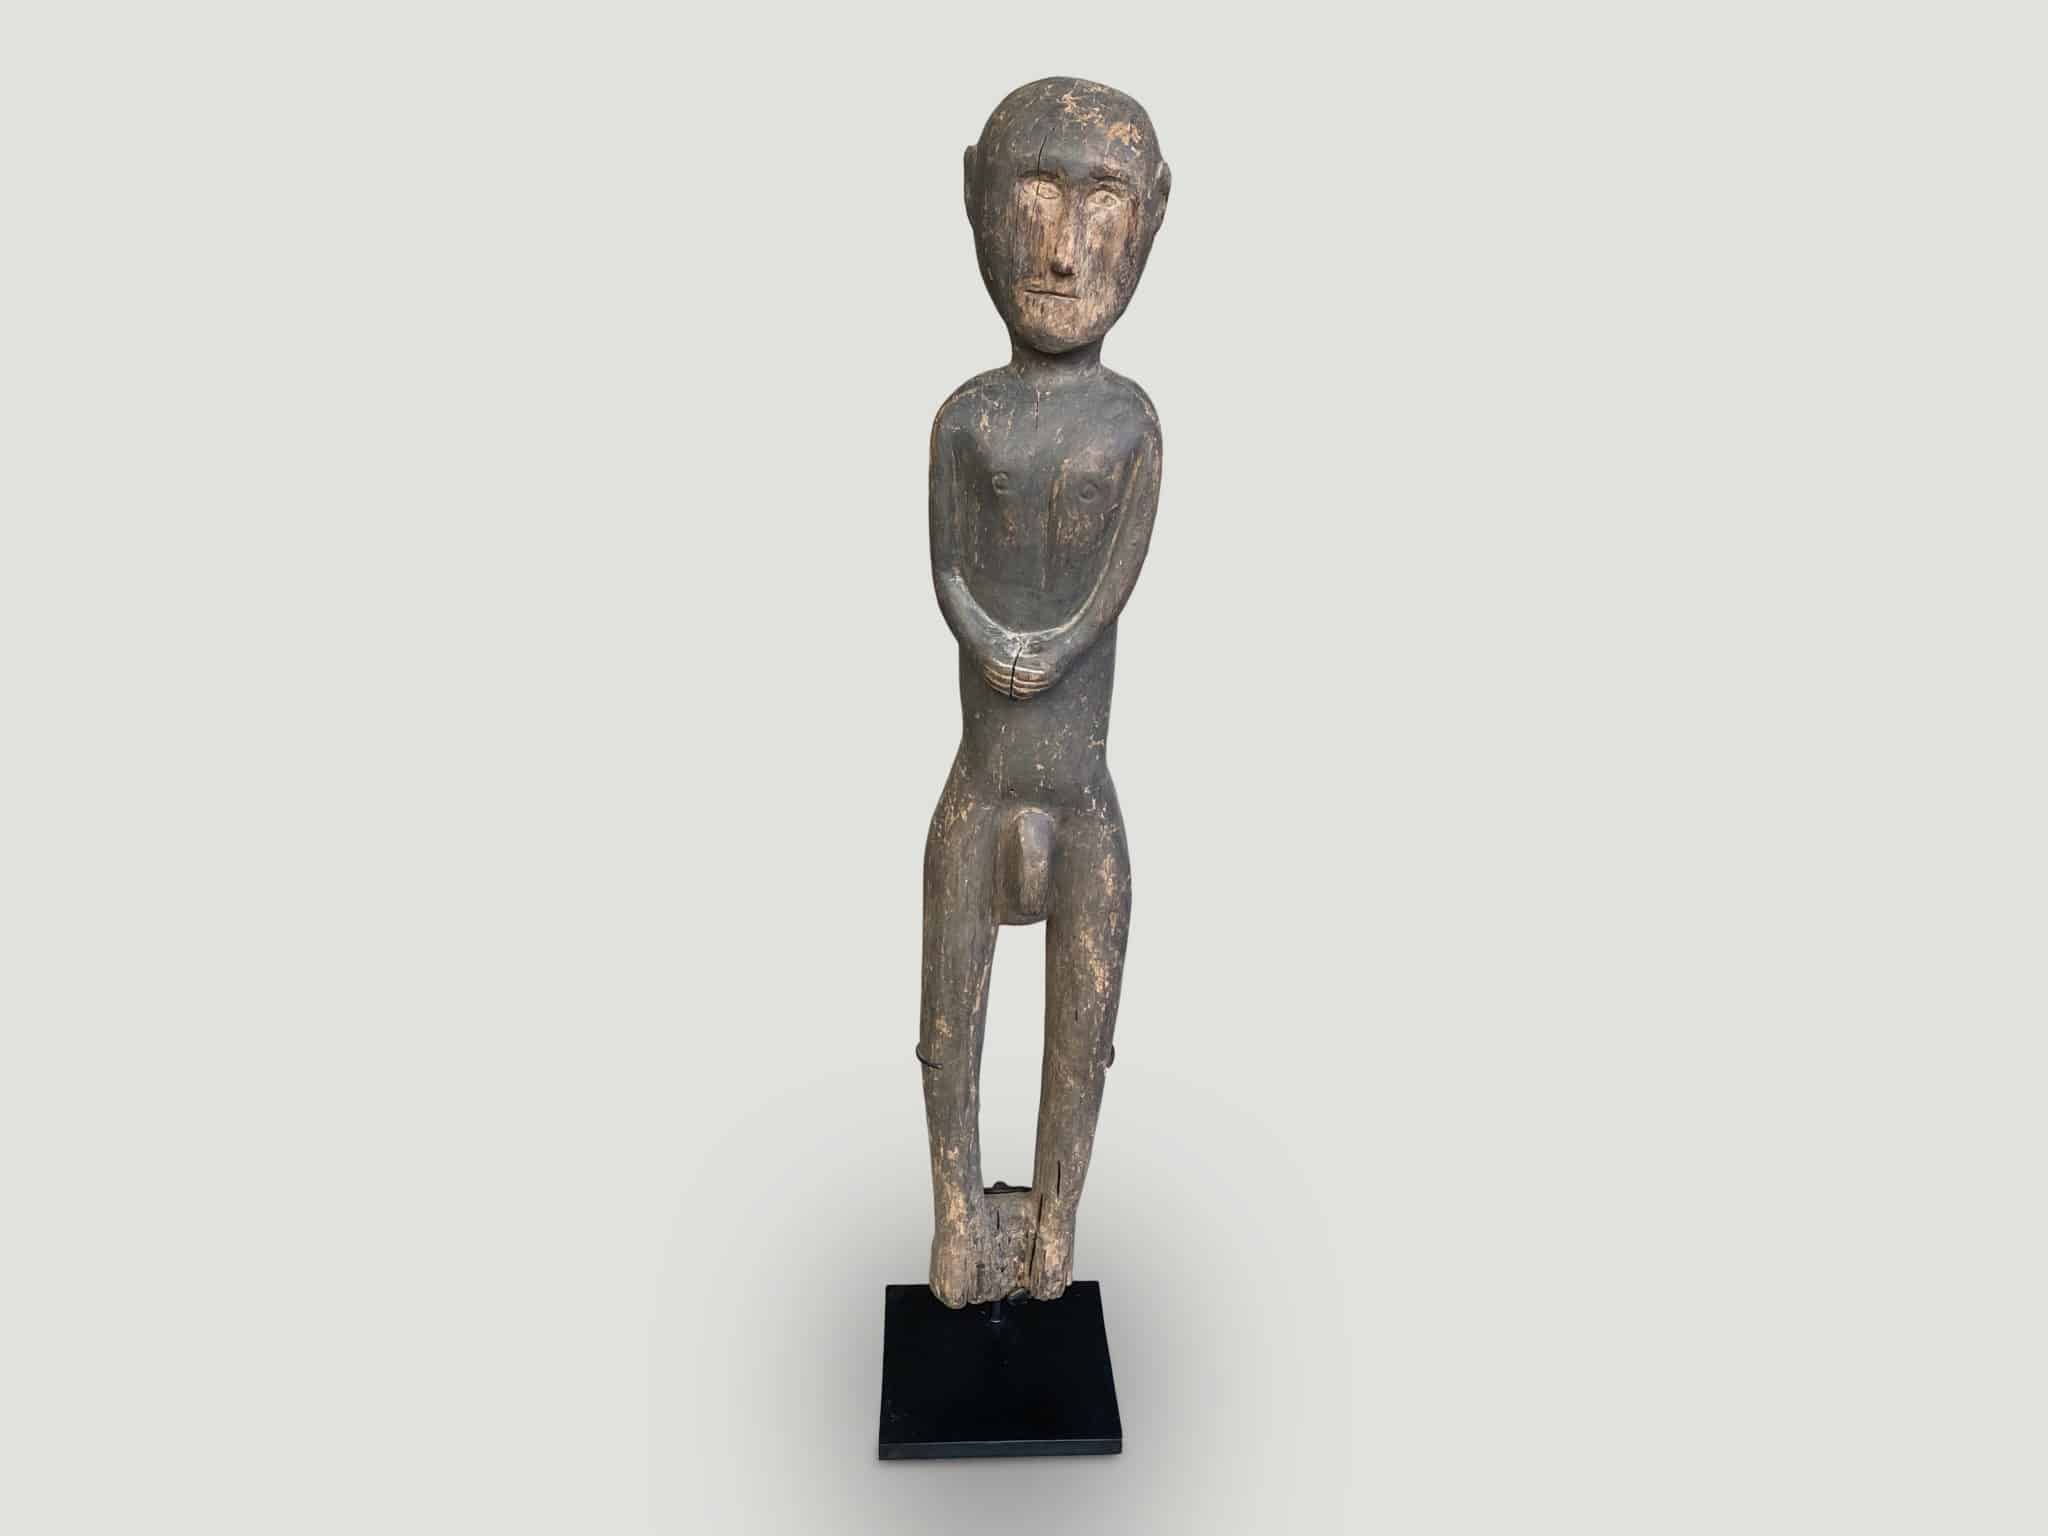 Antique male statue hand carved from a single wood log from Kodi Sumba